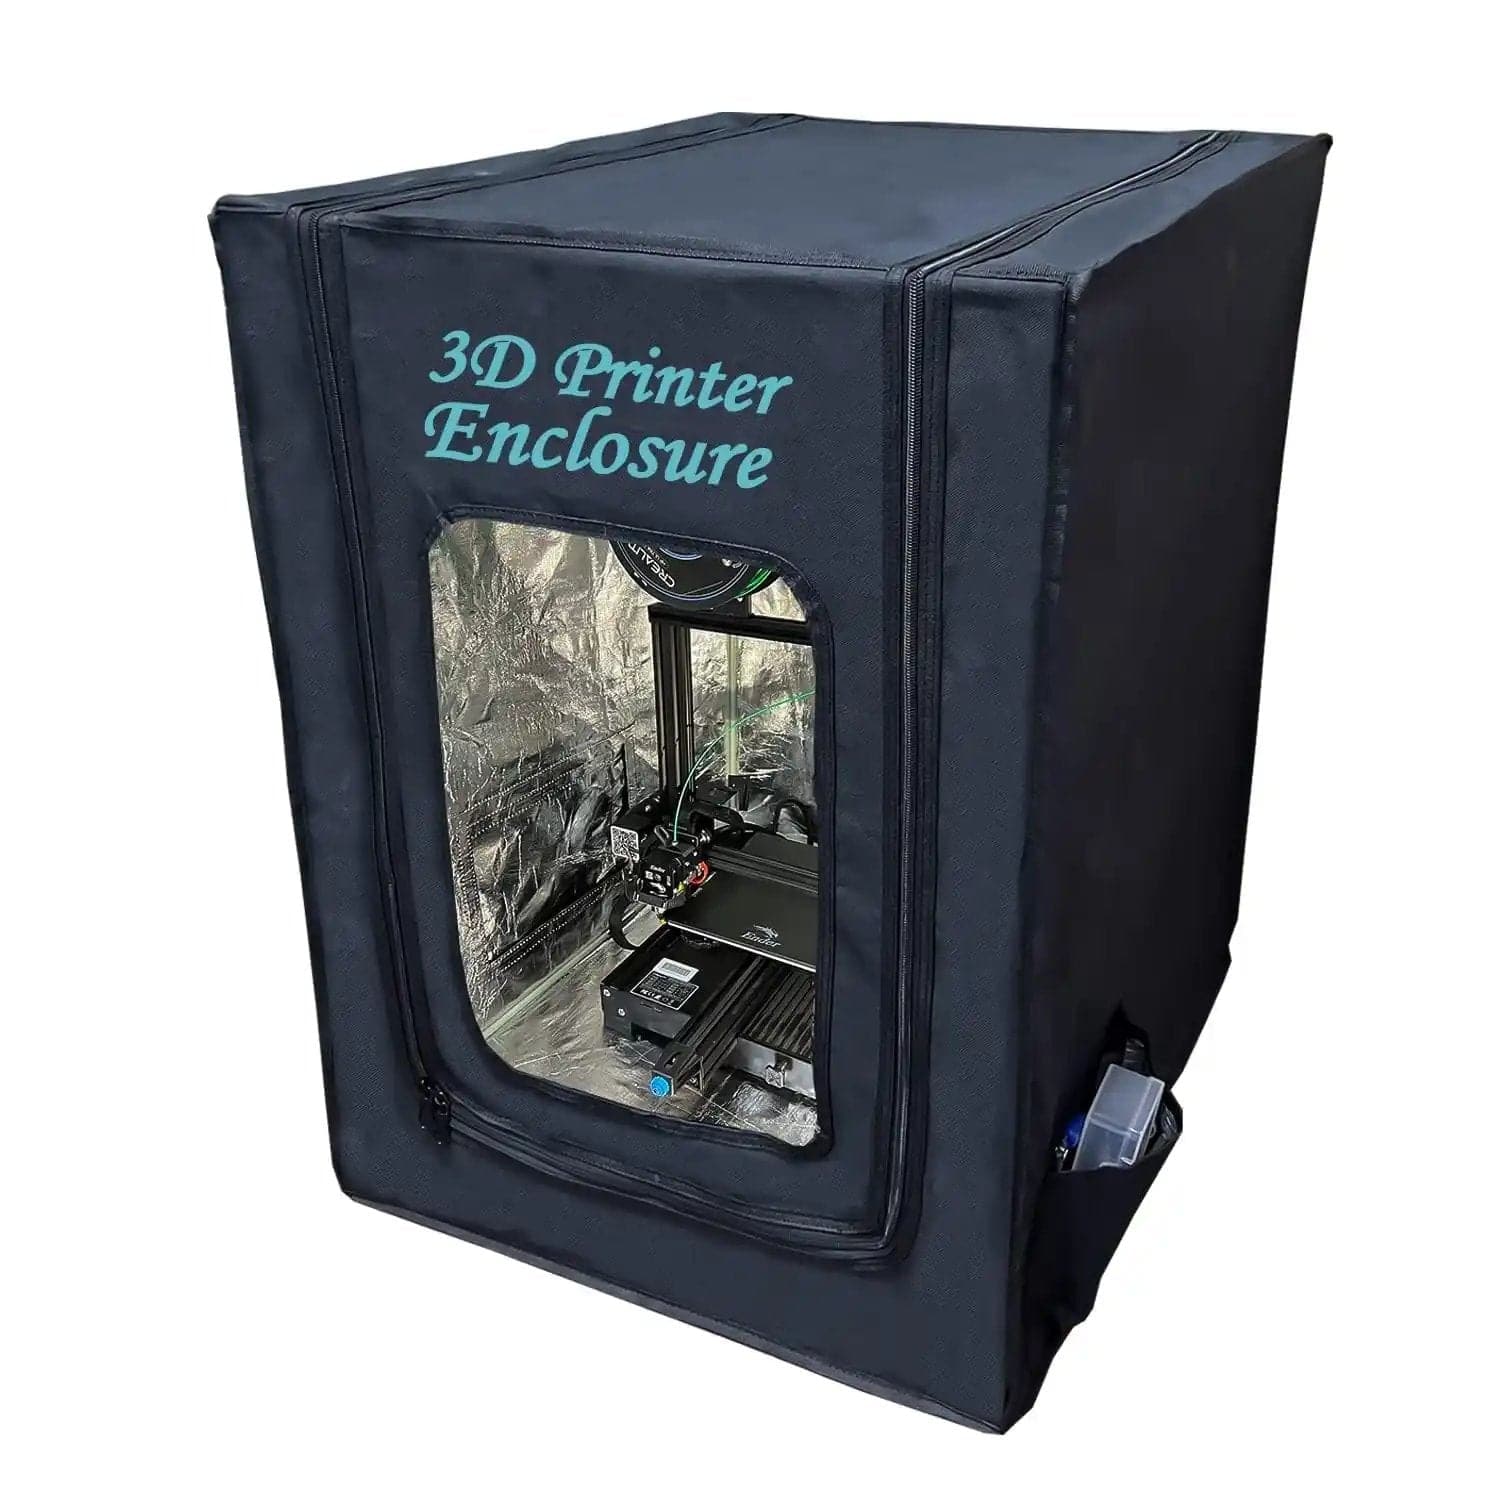 YOOPAI 3D Printer Enclosure for Fireproof & Dustproof
[Ship From Amazon FBA Warehouse] Same shipping service with Amazon. Enjoy reliable performance and fast shipping with the Amazon FBA Warehouse.
[Multifunction StrucYOOPAI 3D Printer Enclosure3D Printer Accessories